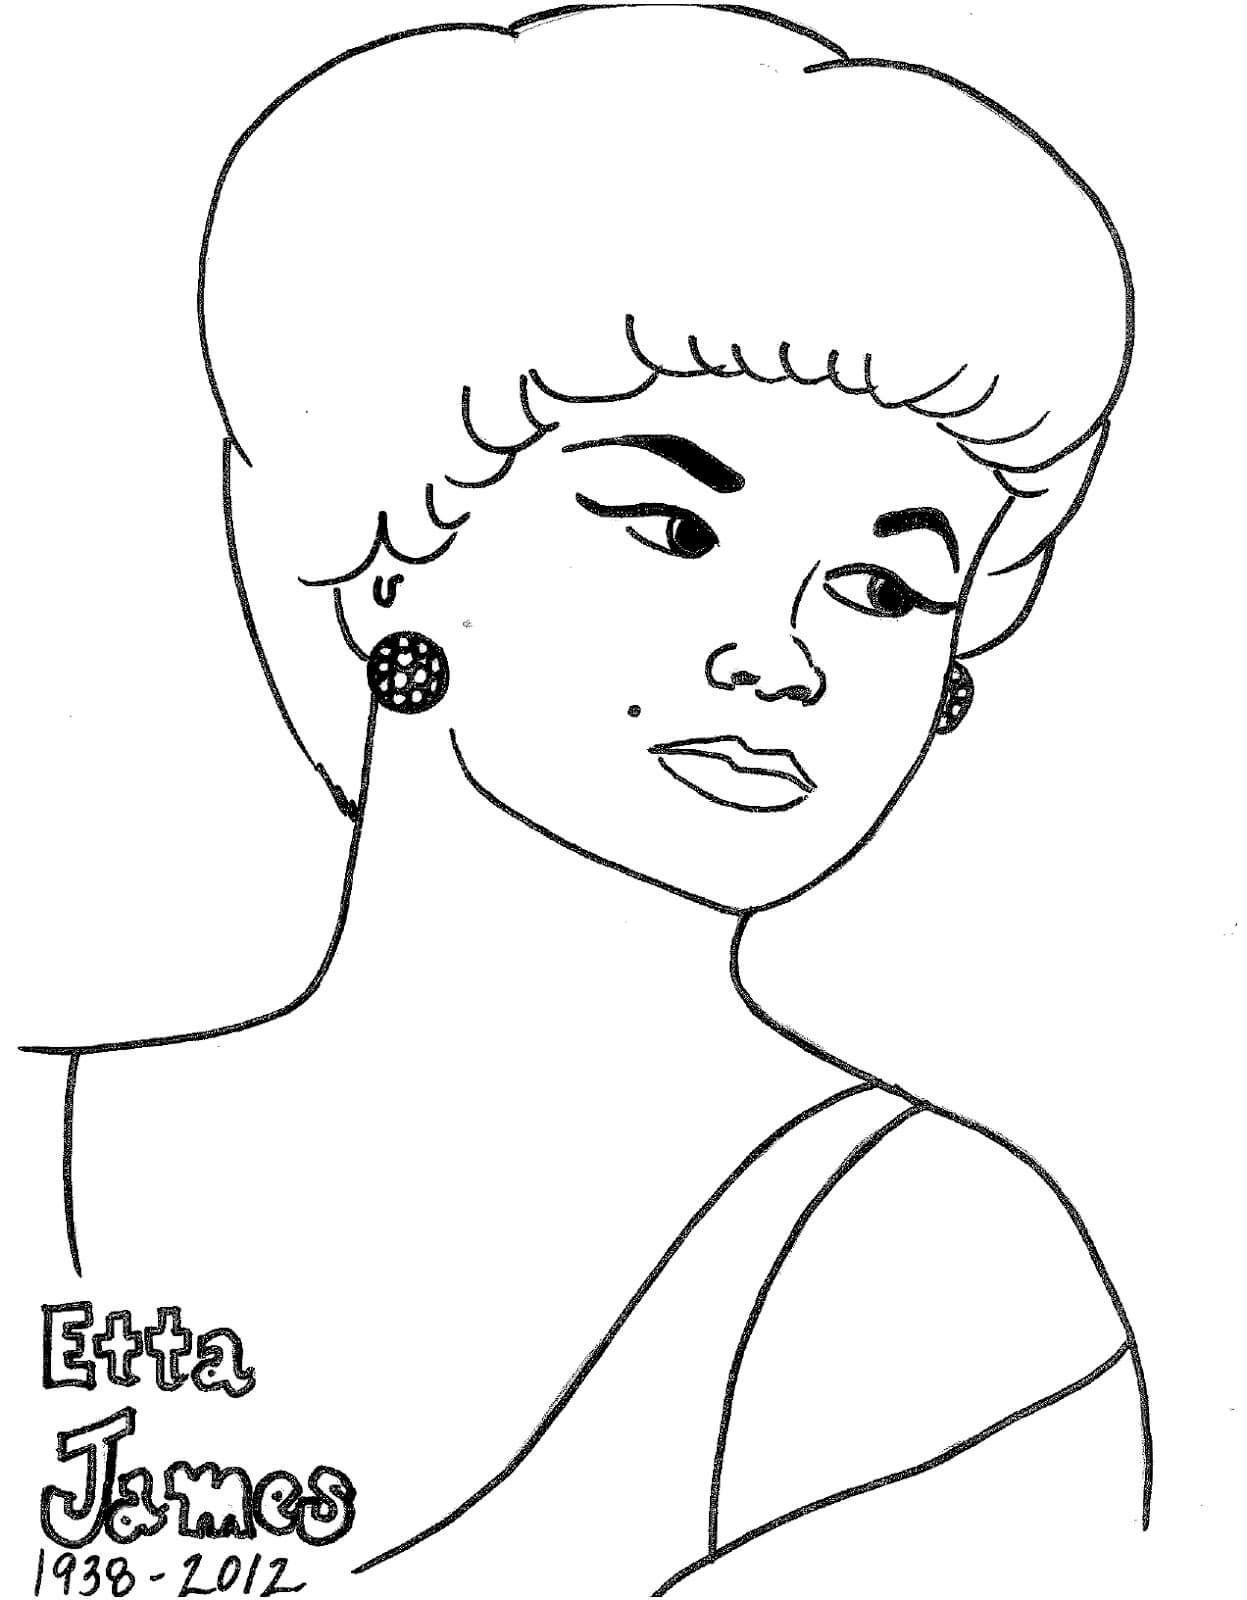 Etta James - Black History Month Coloring Pages